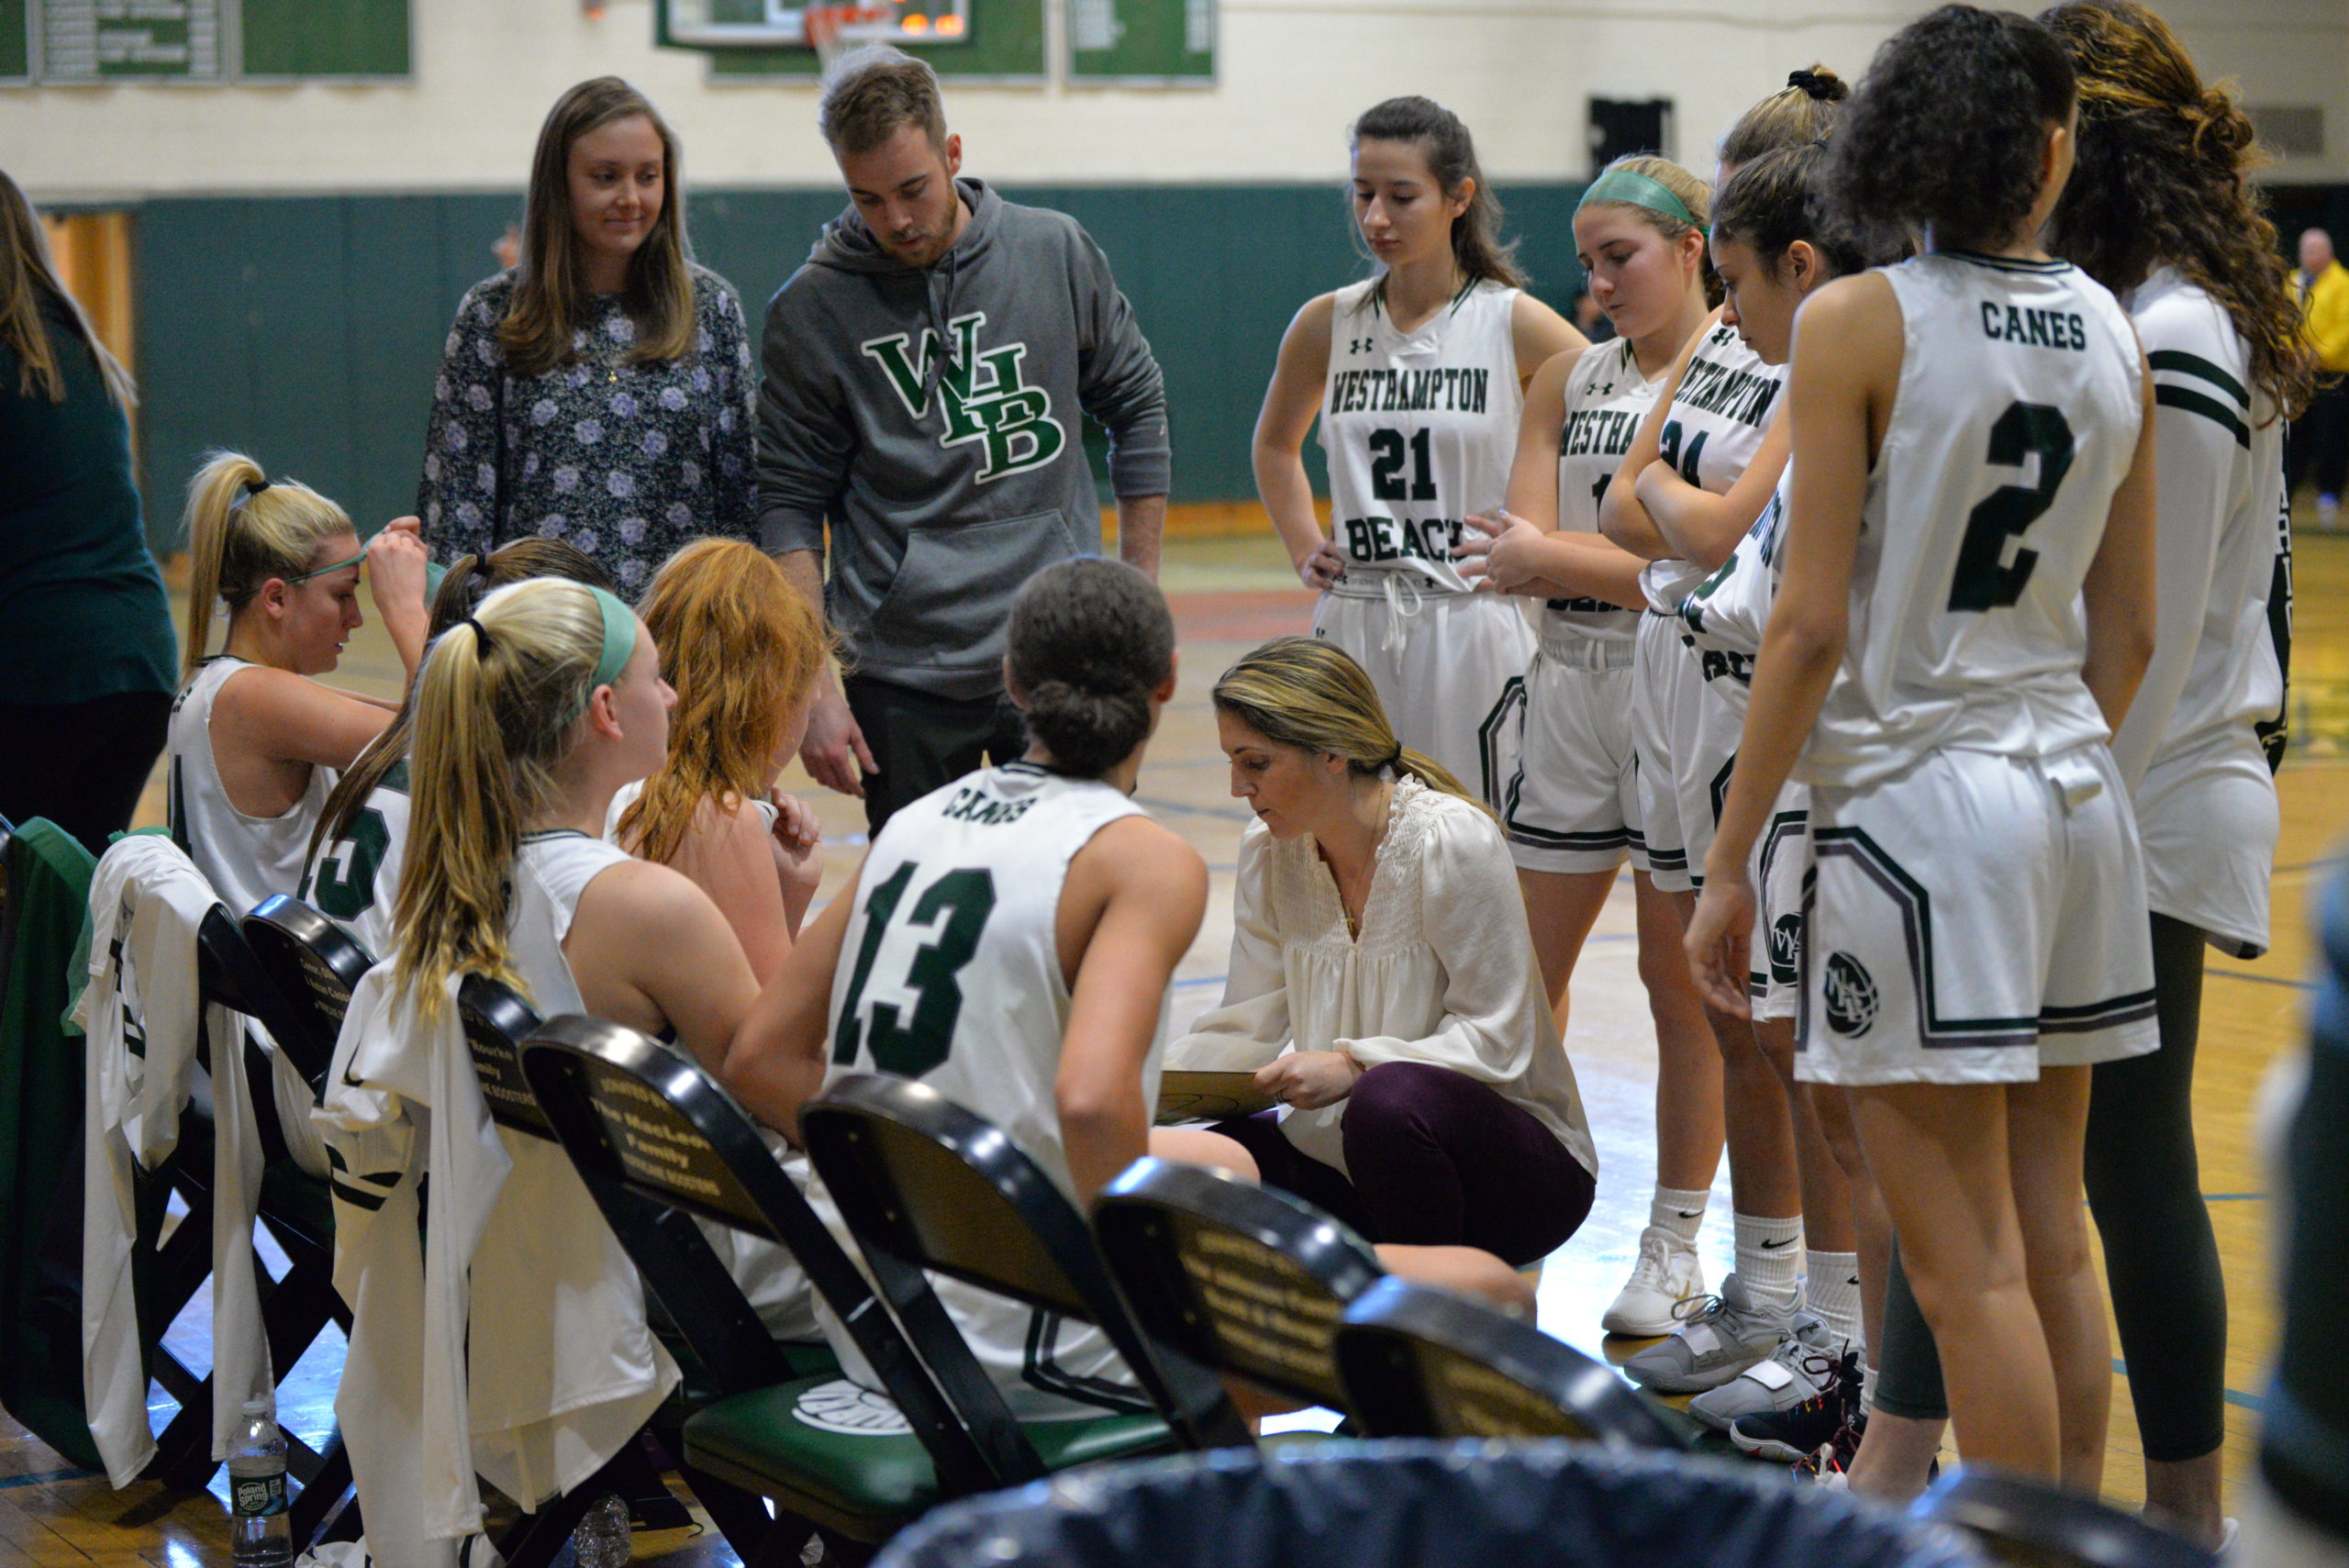 Westhampton Beach head coach Katie Peters goes over some strategy with her players during a time out.